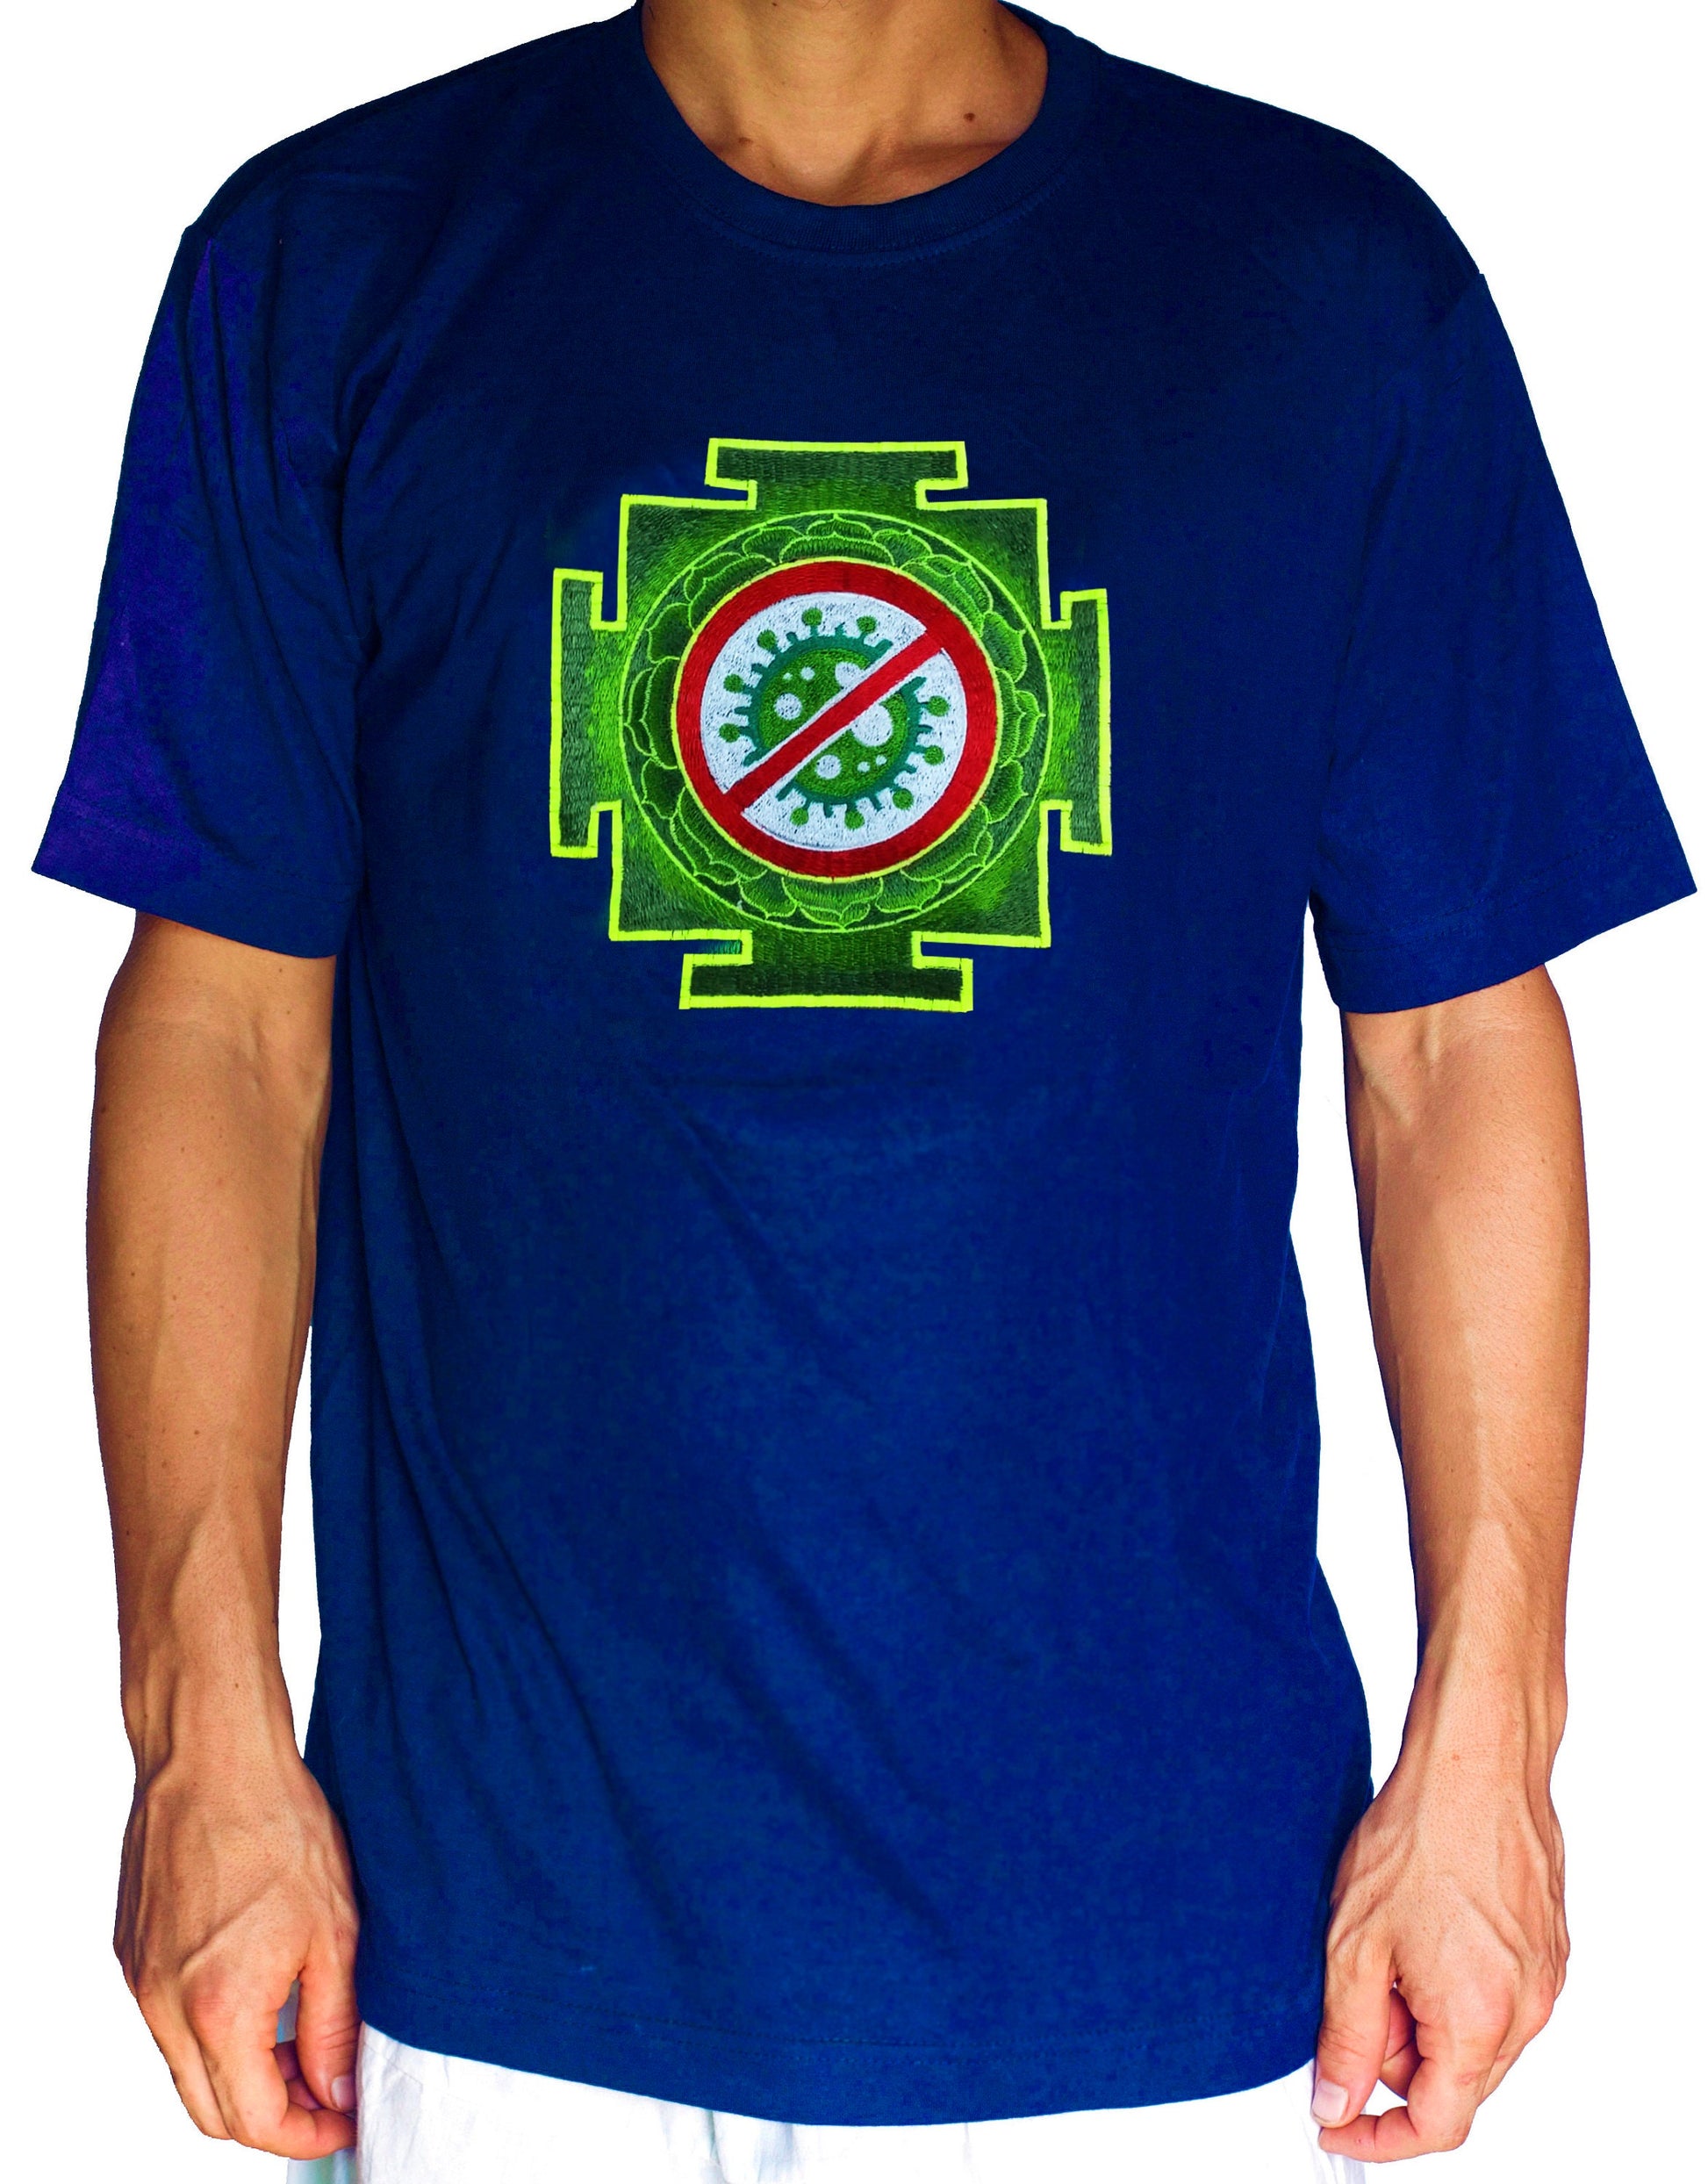 Antivirus T-Shirt Green Yantra in any size and color - sacred healing geometry - my body my choice no vax - with flower of life embroidery